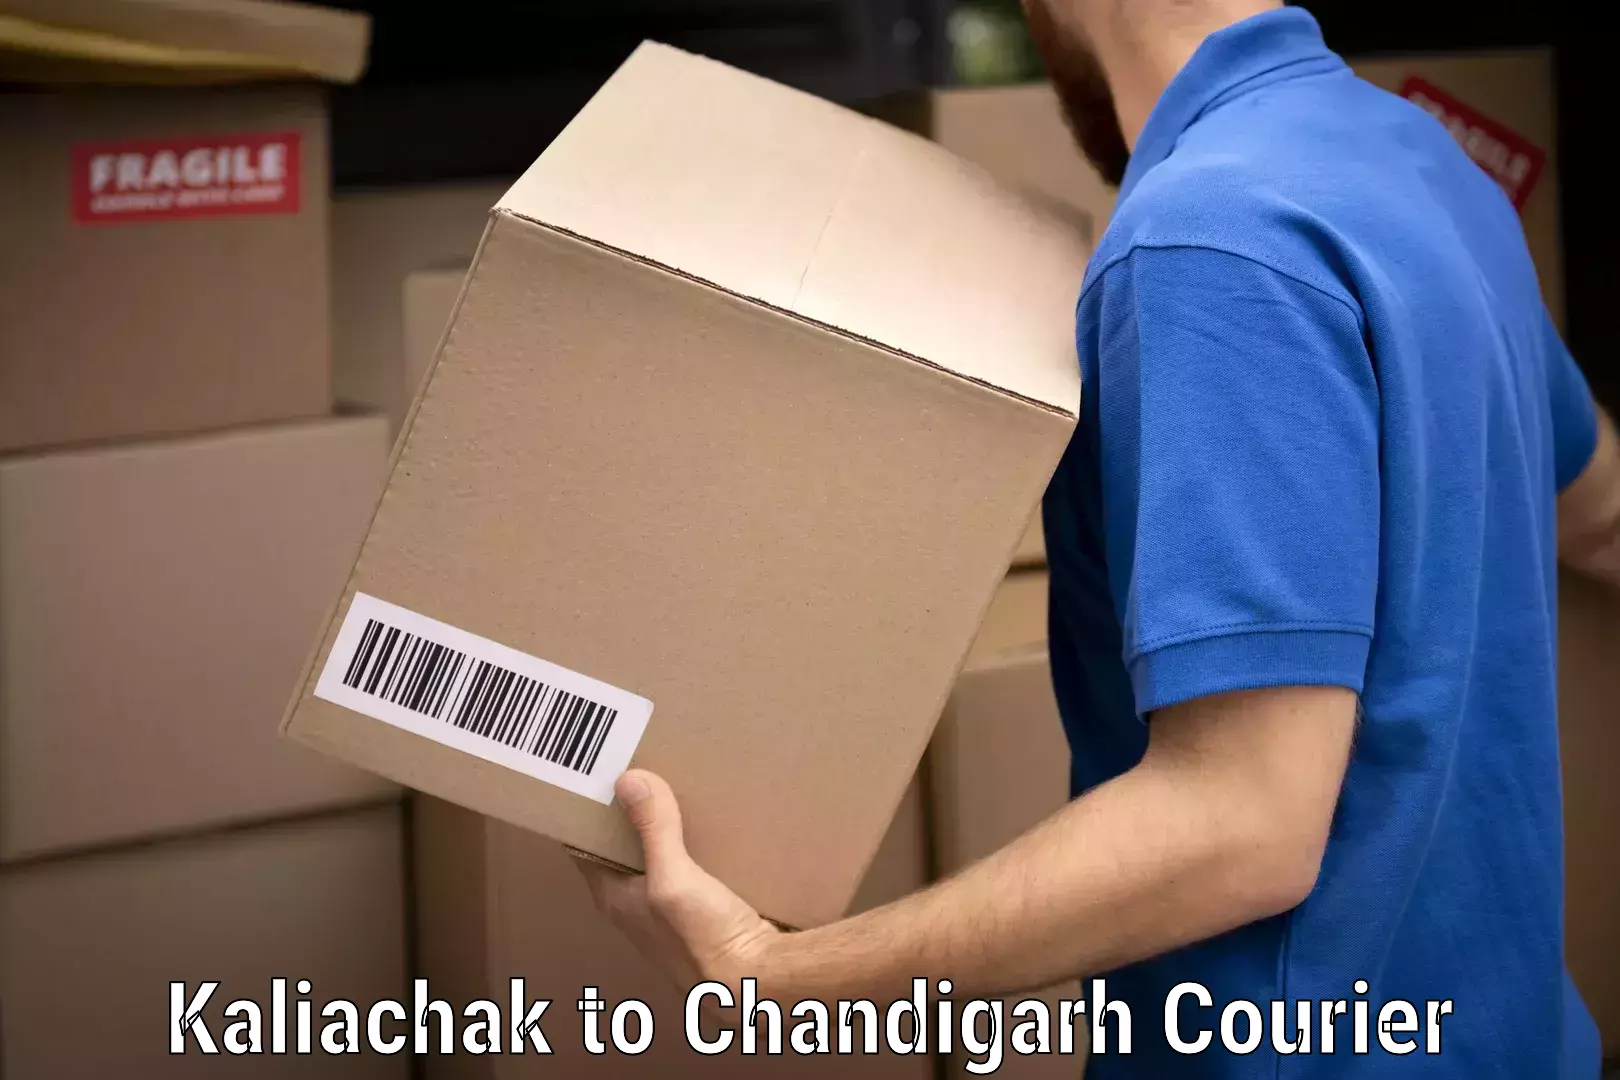 Moving and storage services Kaliachak to Chandigarh